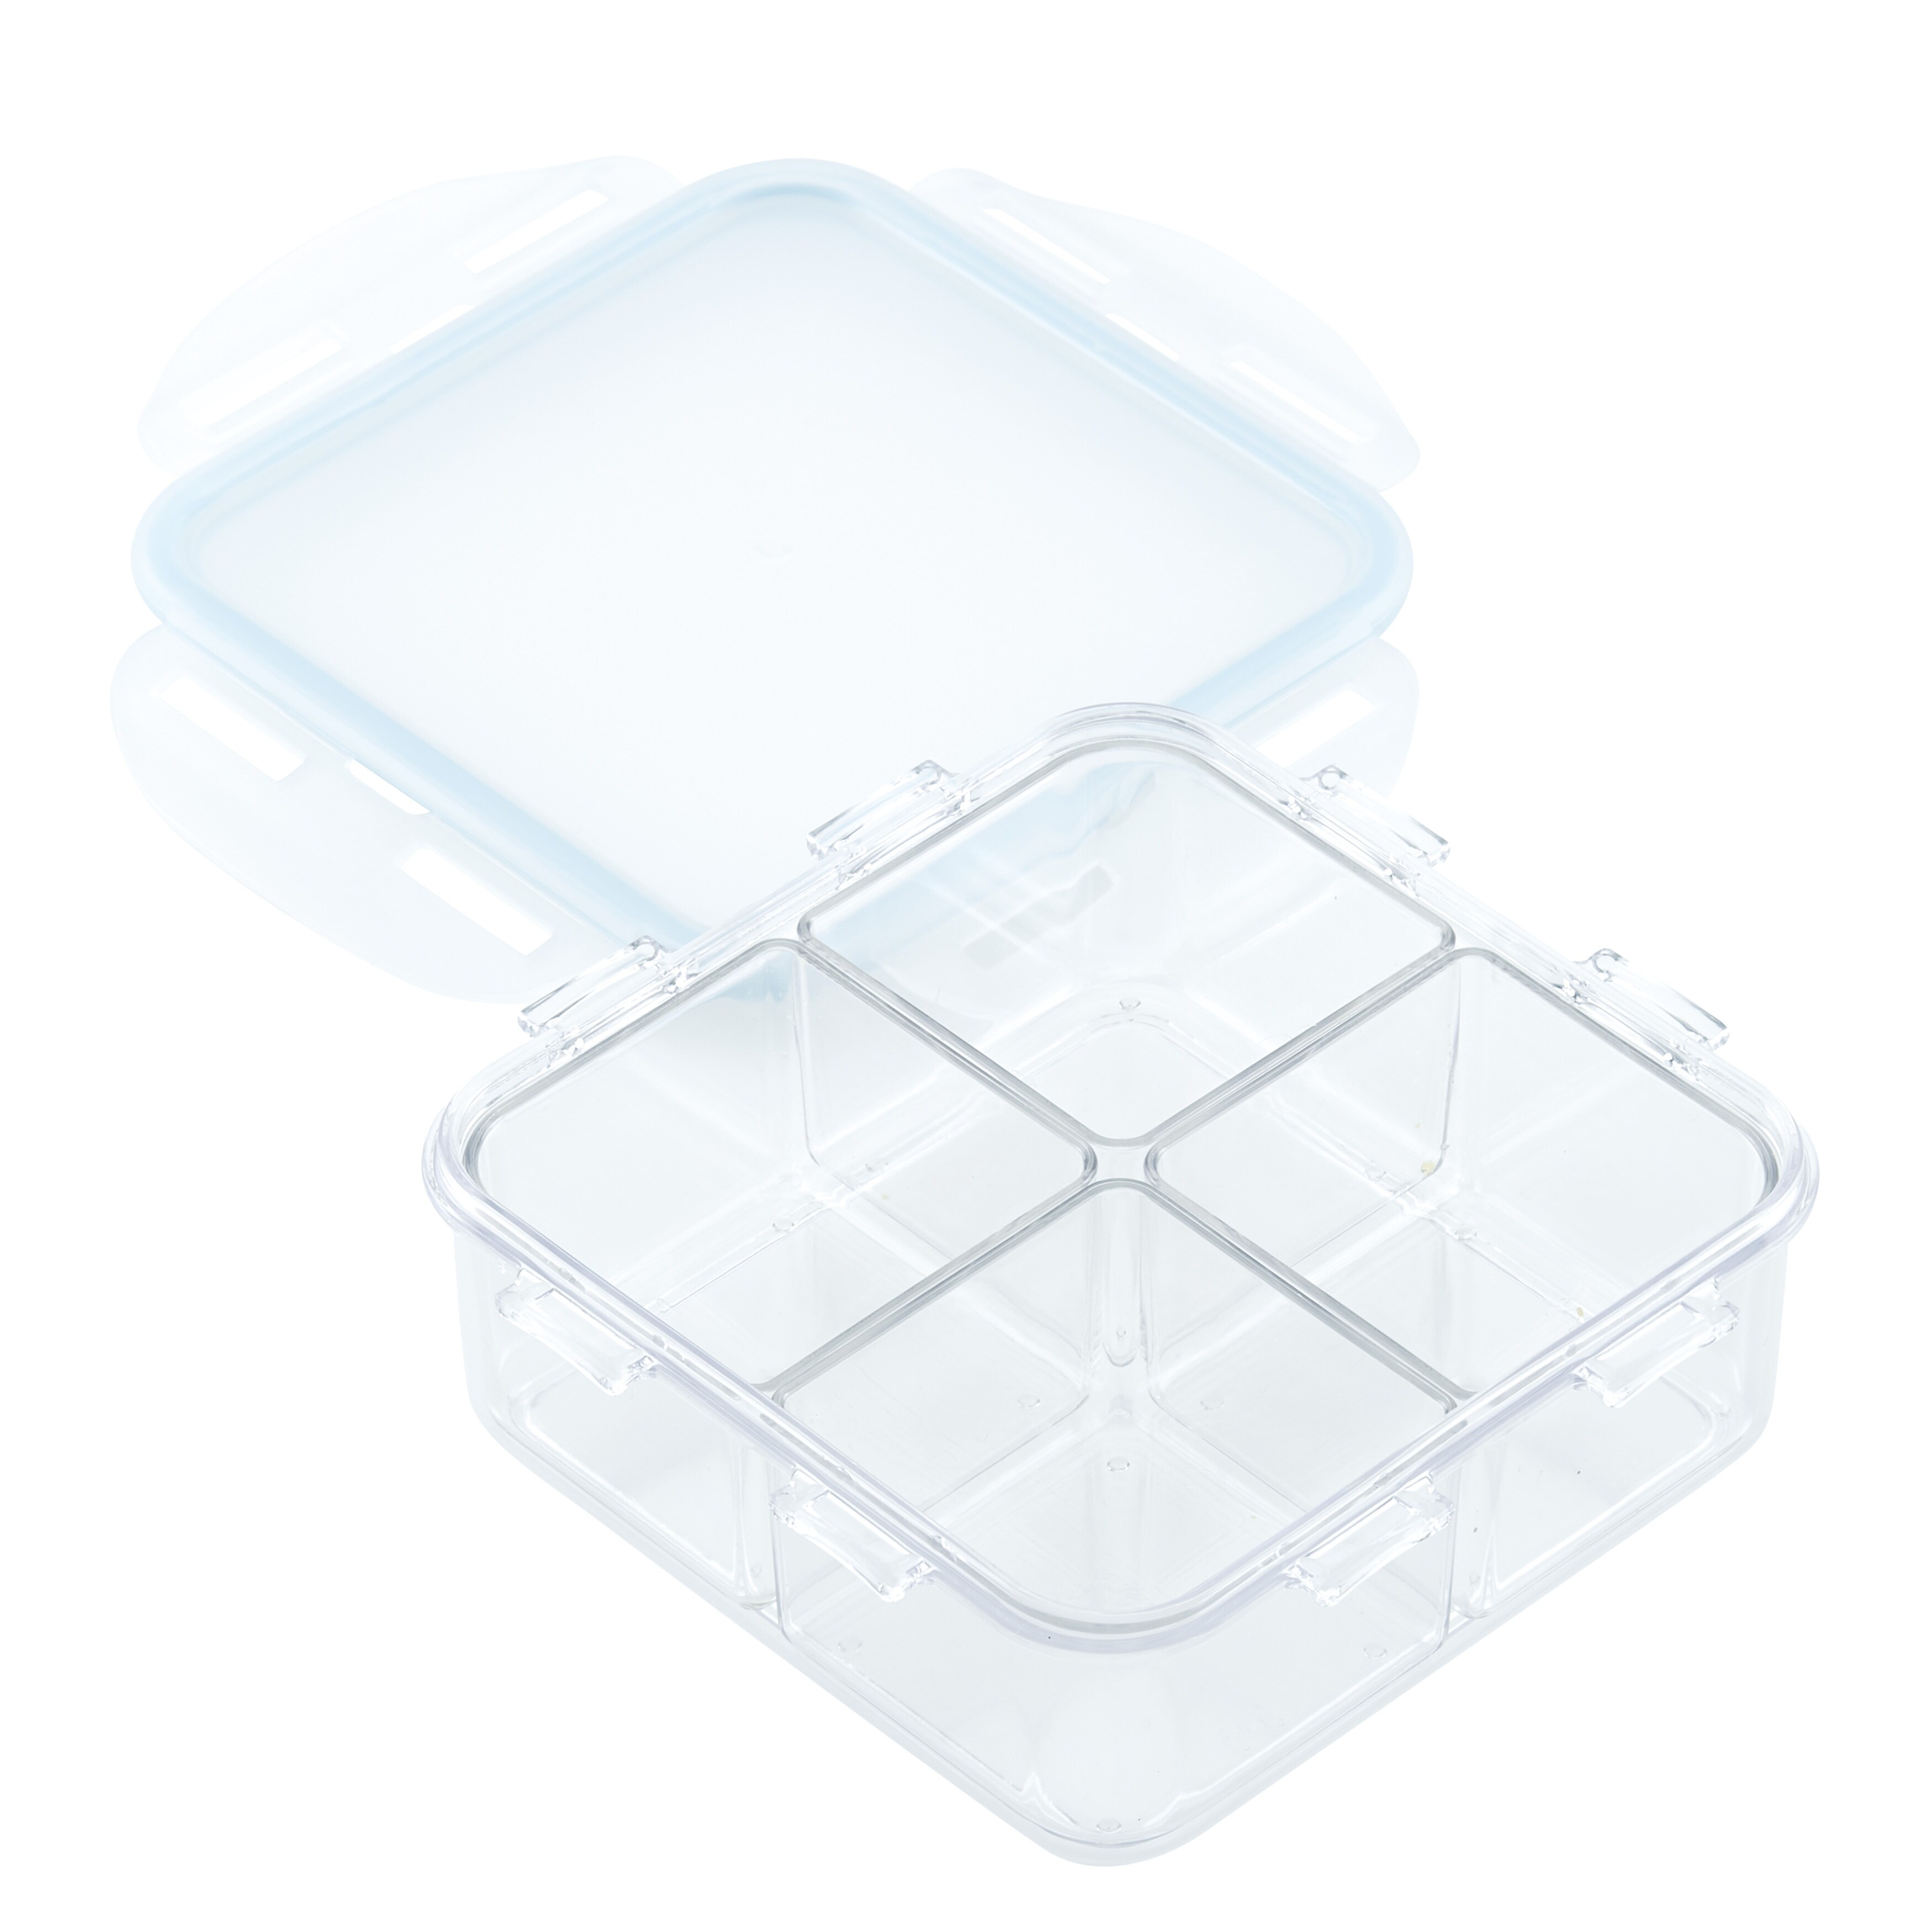 https://ak1.ostkcdn.com/images/products/is/images/direct/5c3804c940144147a61fc8e0e5364cb4b9da82b2/LocknLock-Purely-Better-Square-Food-Storage-Containers-with-Dividers%2C-29-Ounce%2C-Set-of-2.jpg